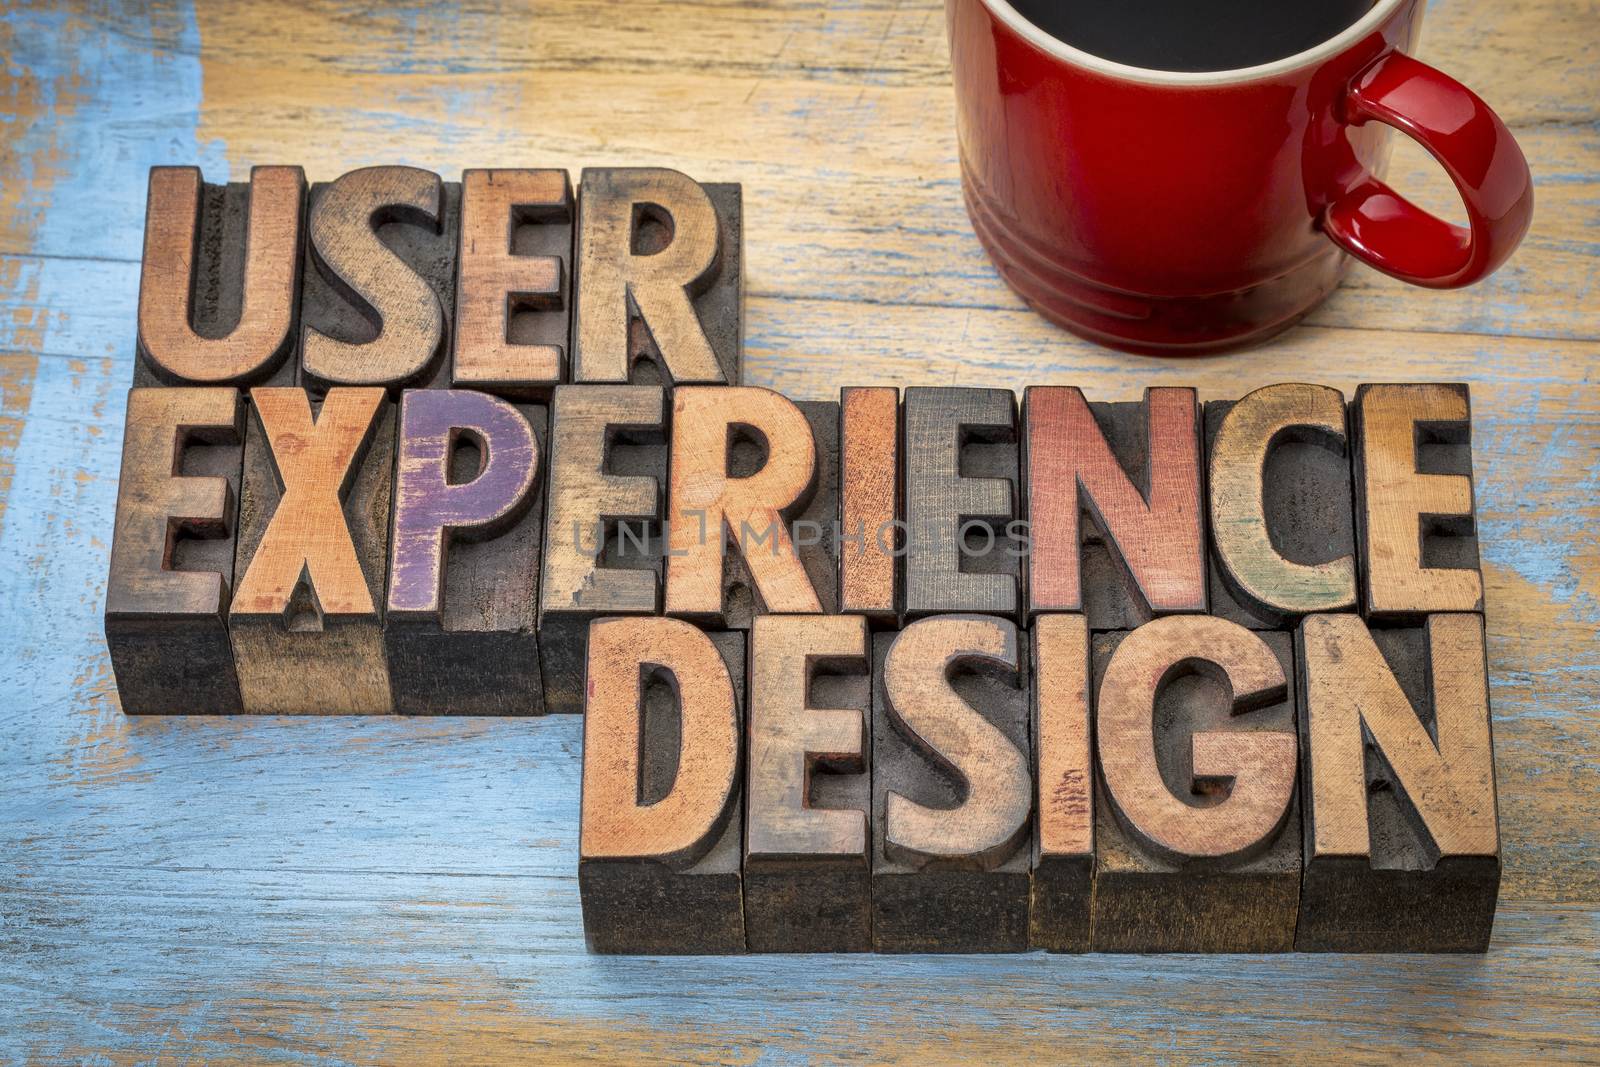 user experience design - word abstract in vintage letterpress wood type with a cup of coffee